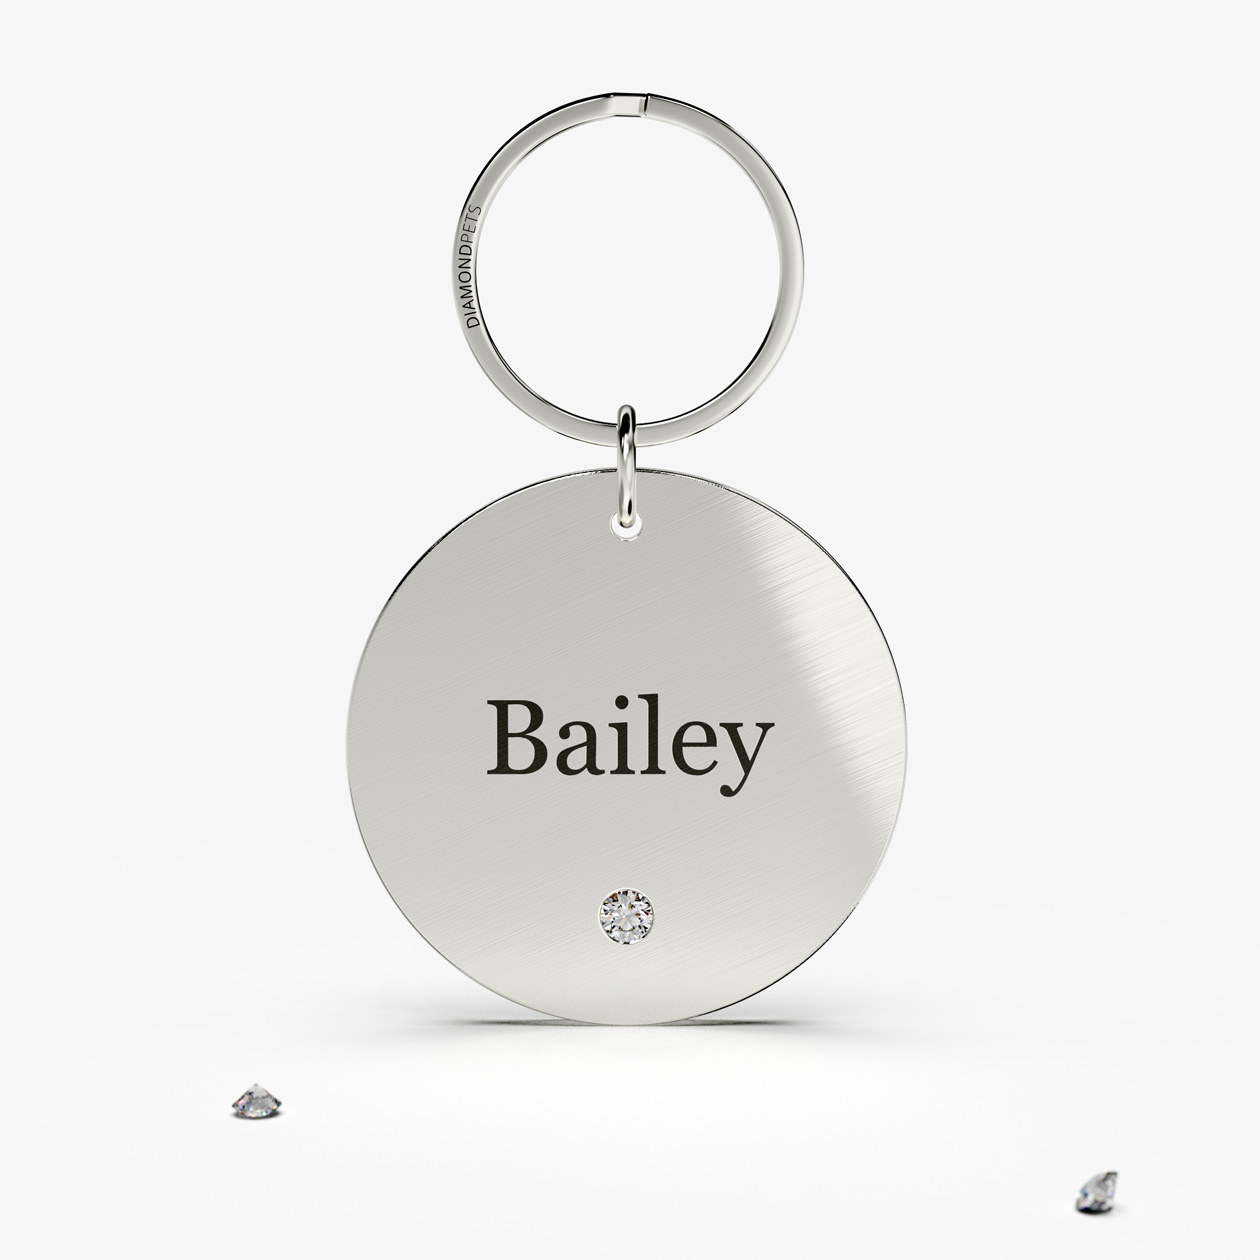 STAINLESS STEEL CLASSIC ROUND PET NAME TAG FRONT SERIF DIAMOND